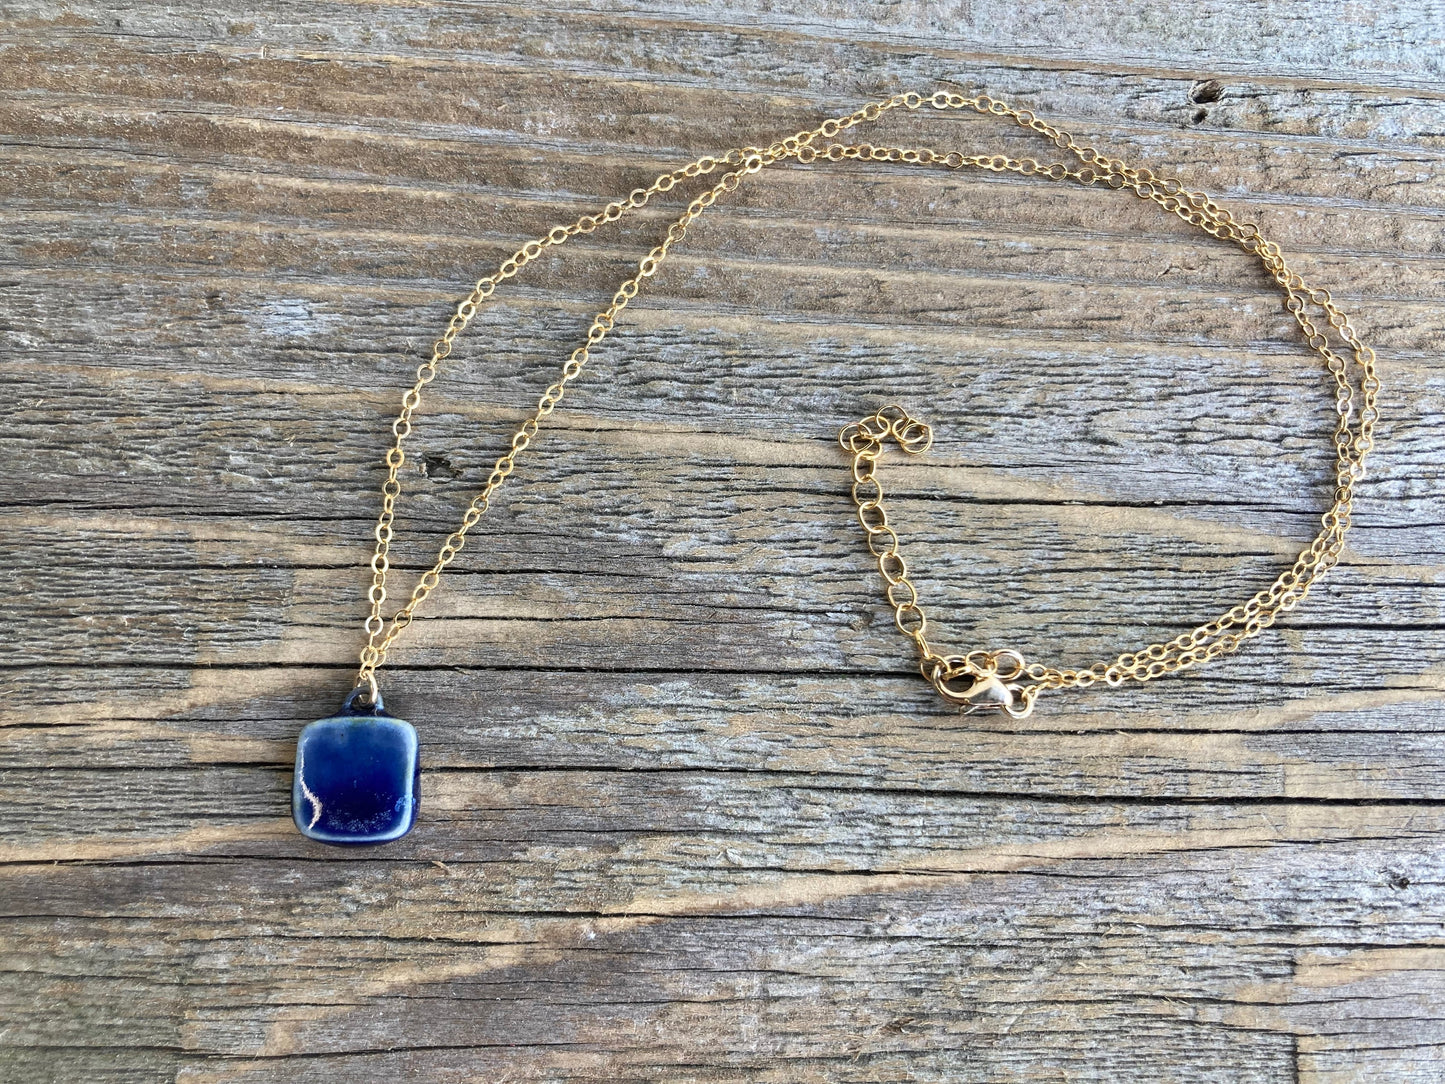 Square Cobalt Necklace, gold-filled chain